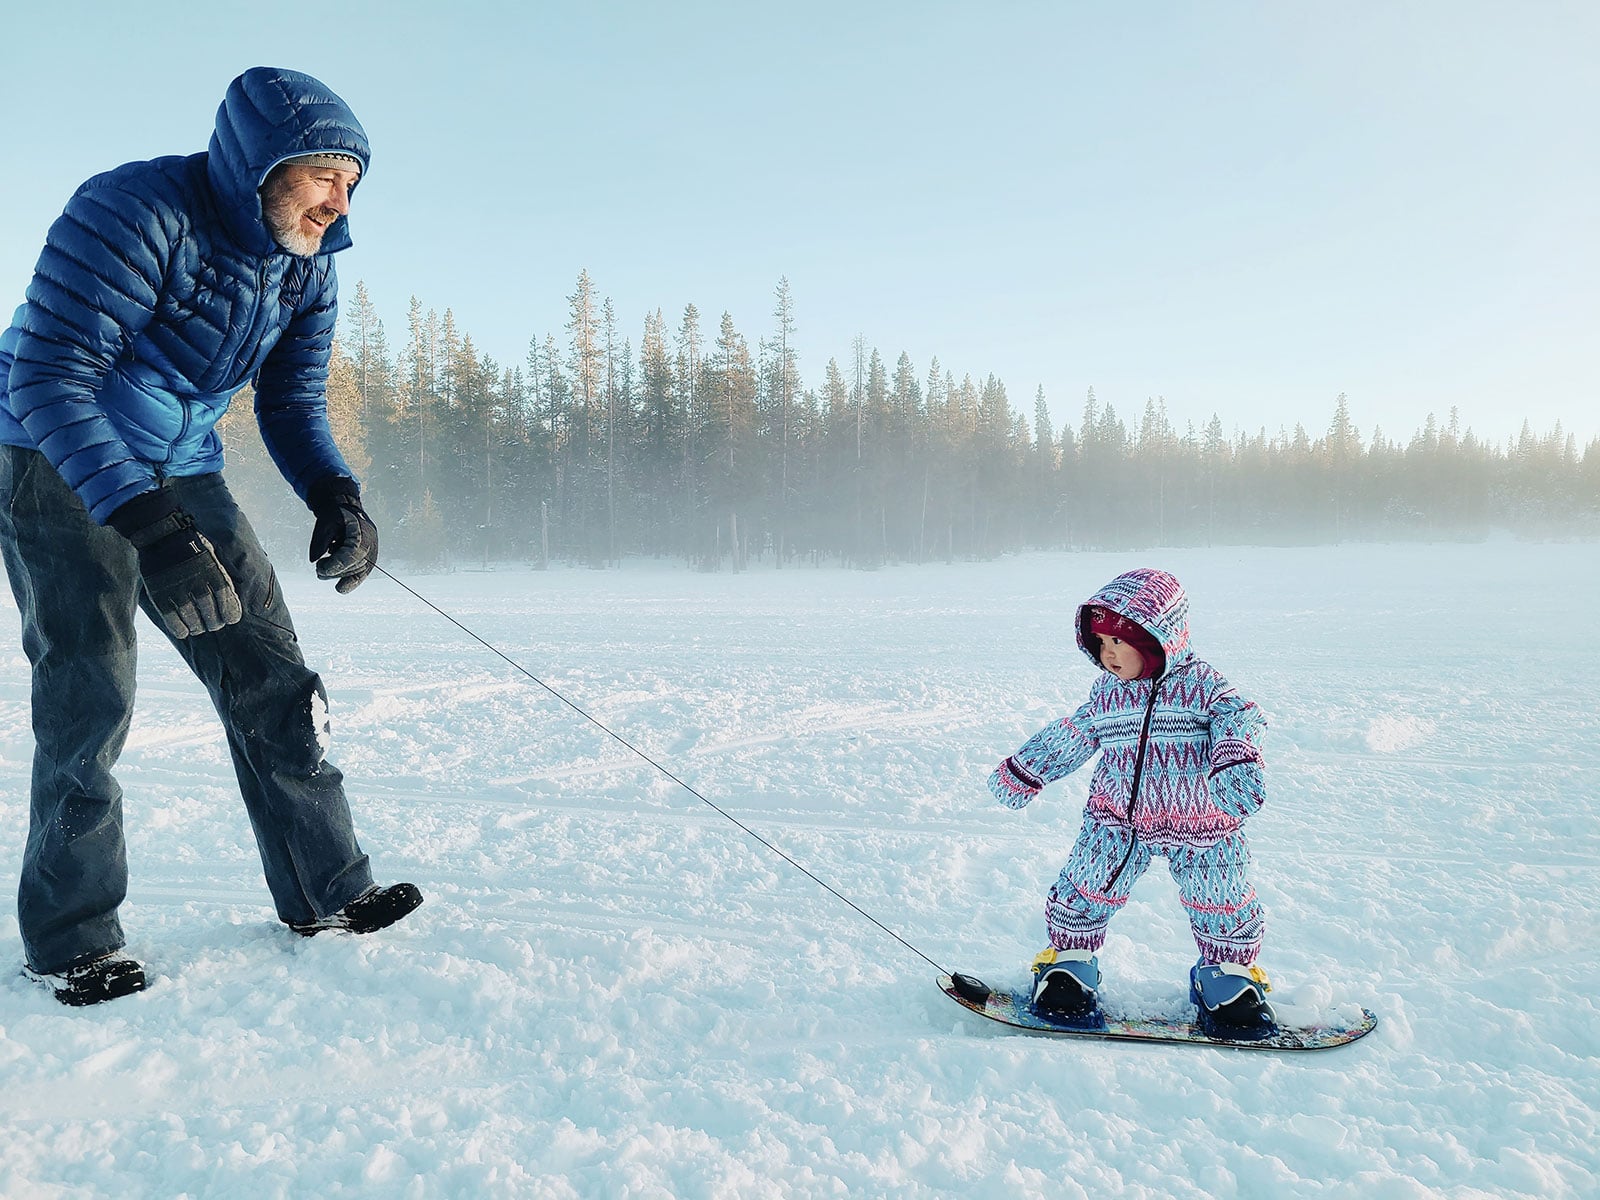 Dad using the Burton Riglet Reel to tow a 1-year-old baby around on a snowboard